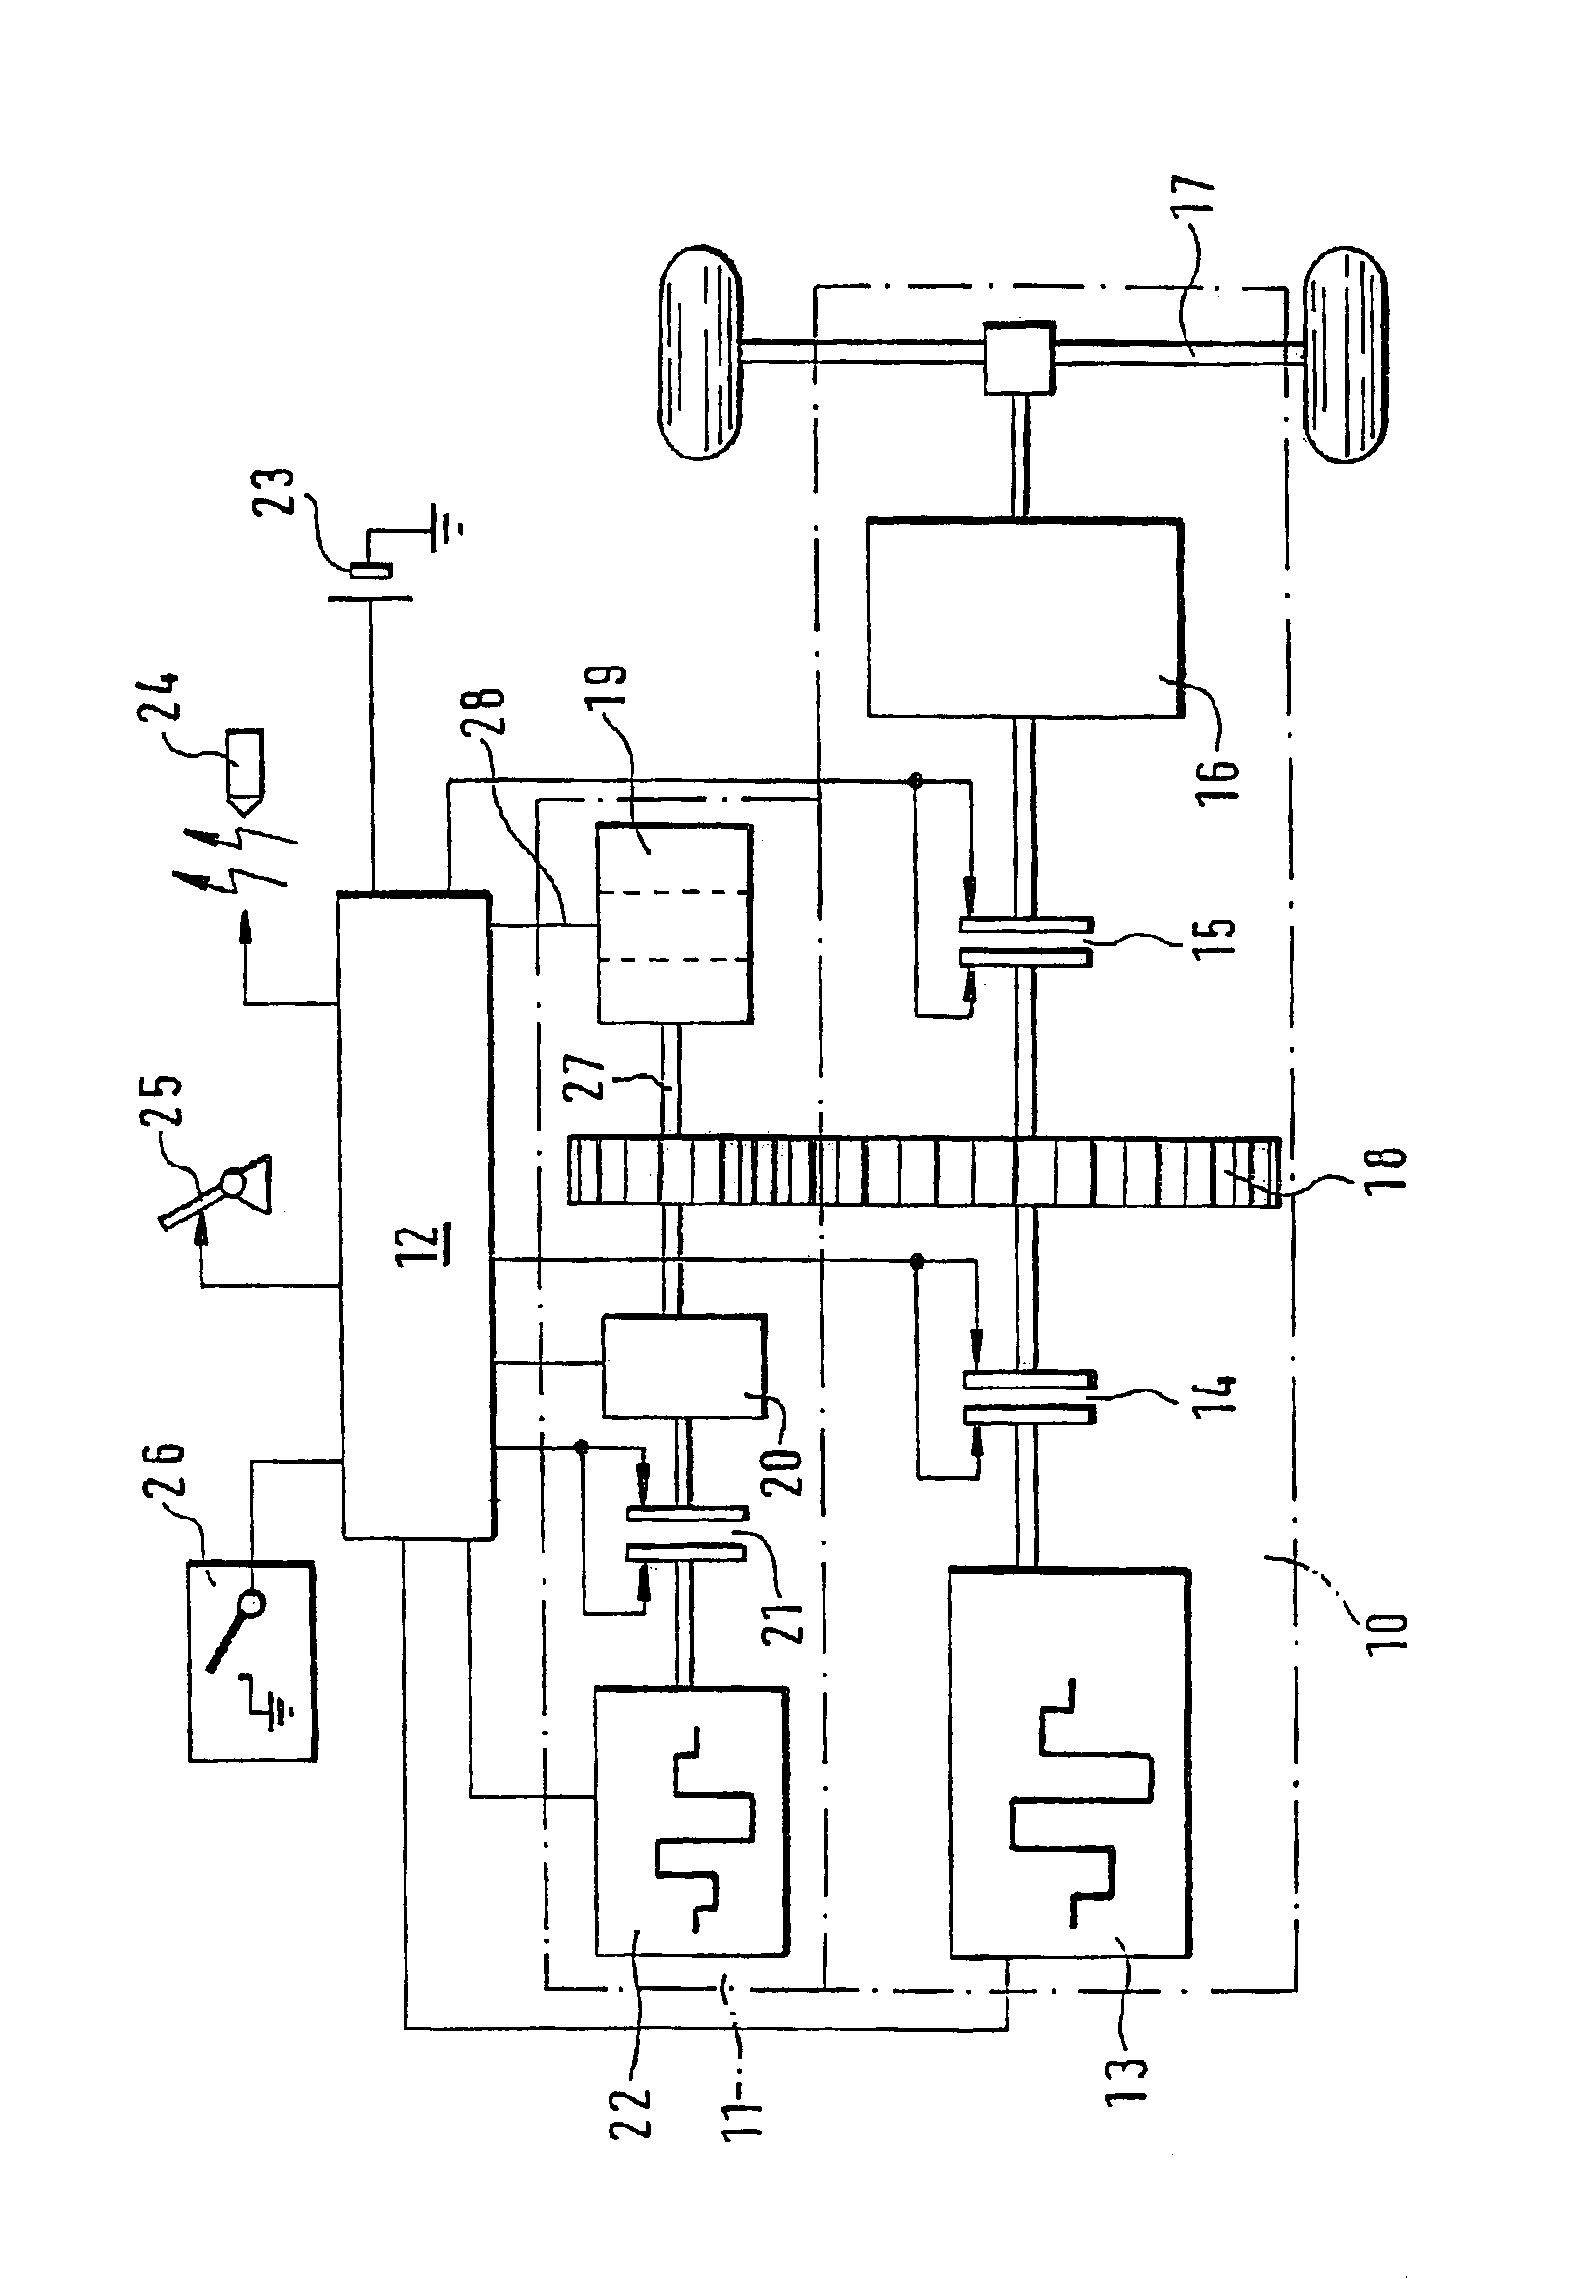 Drive system for motor vehicles